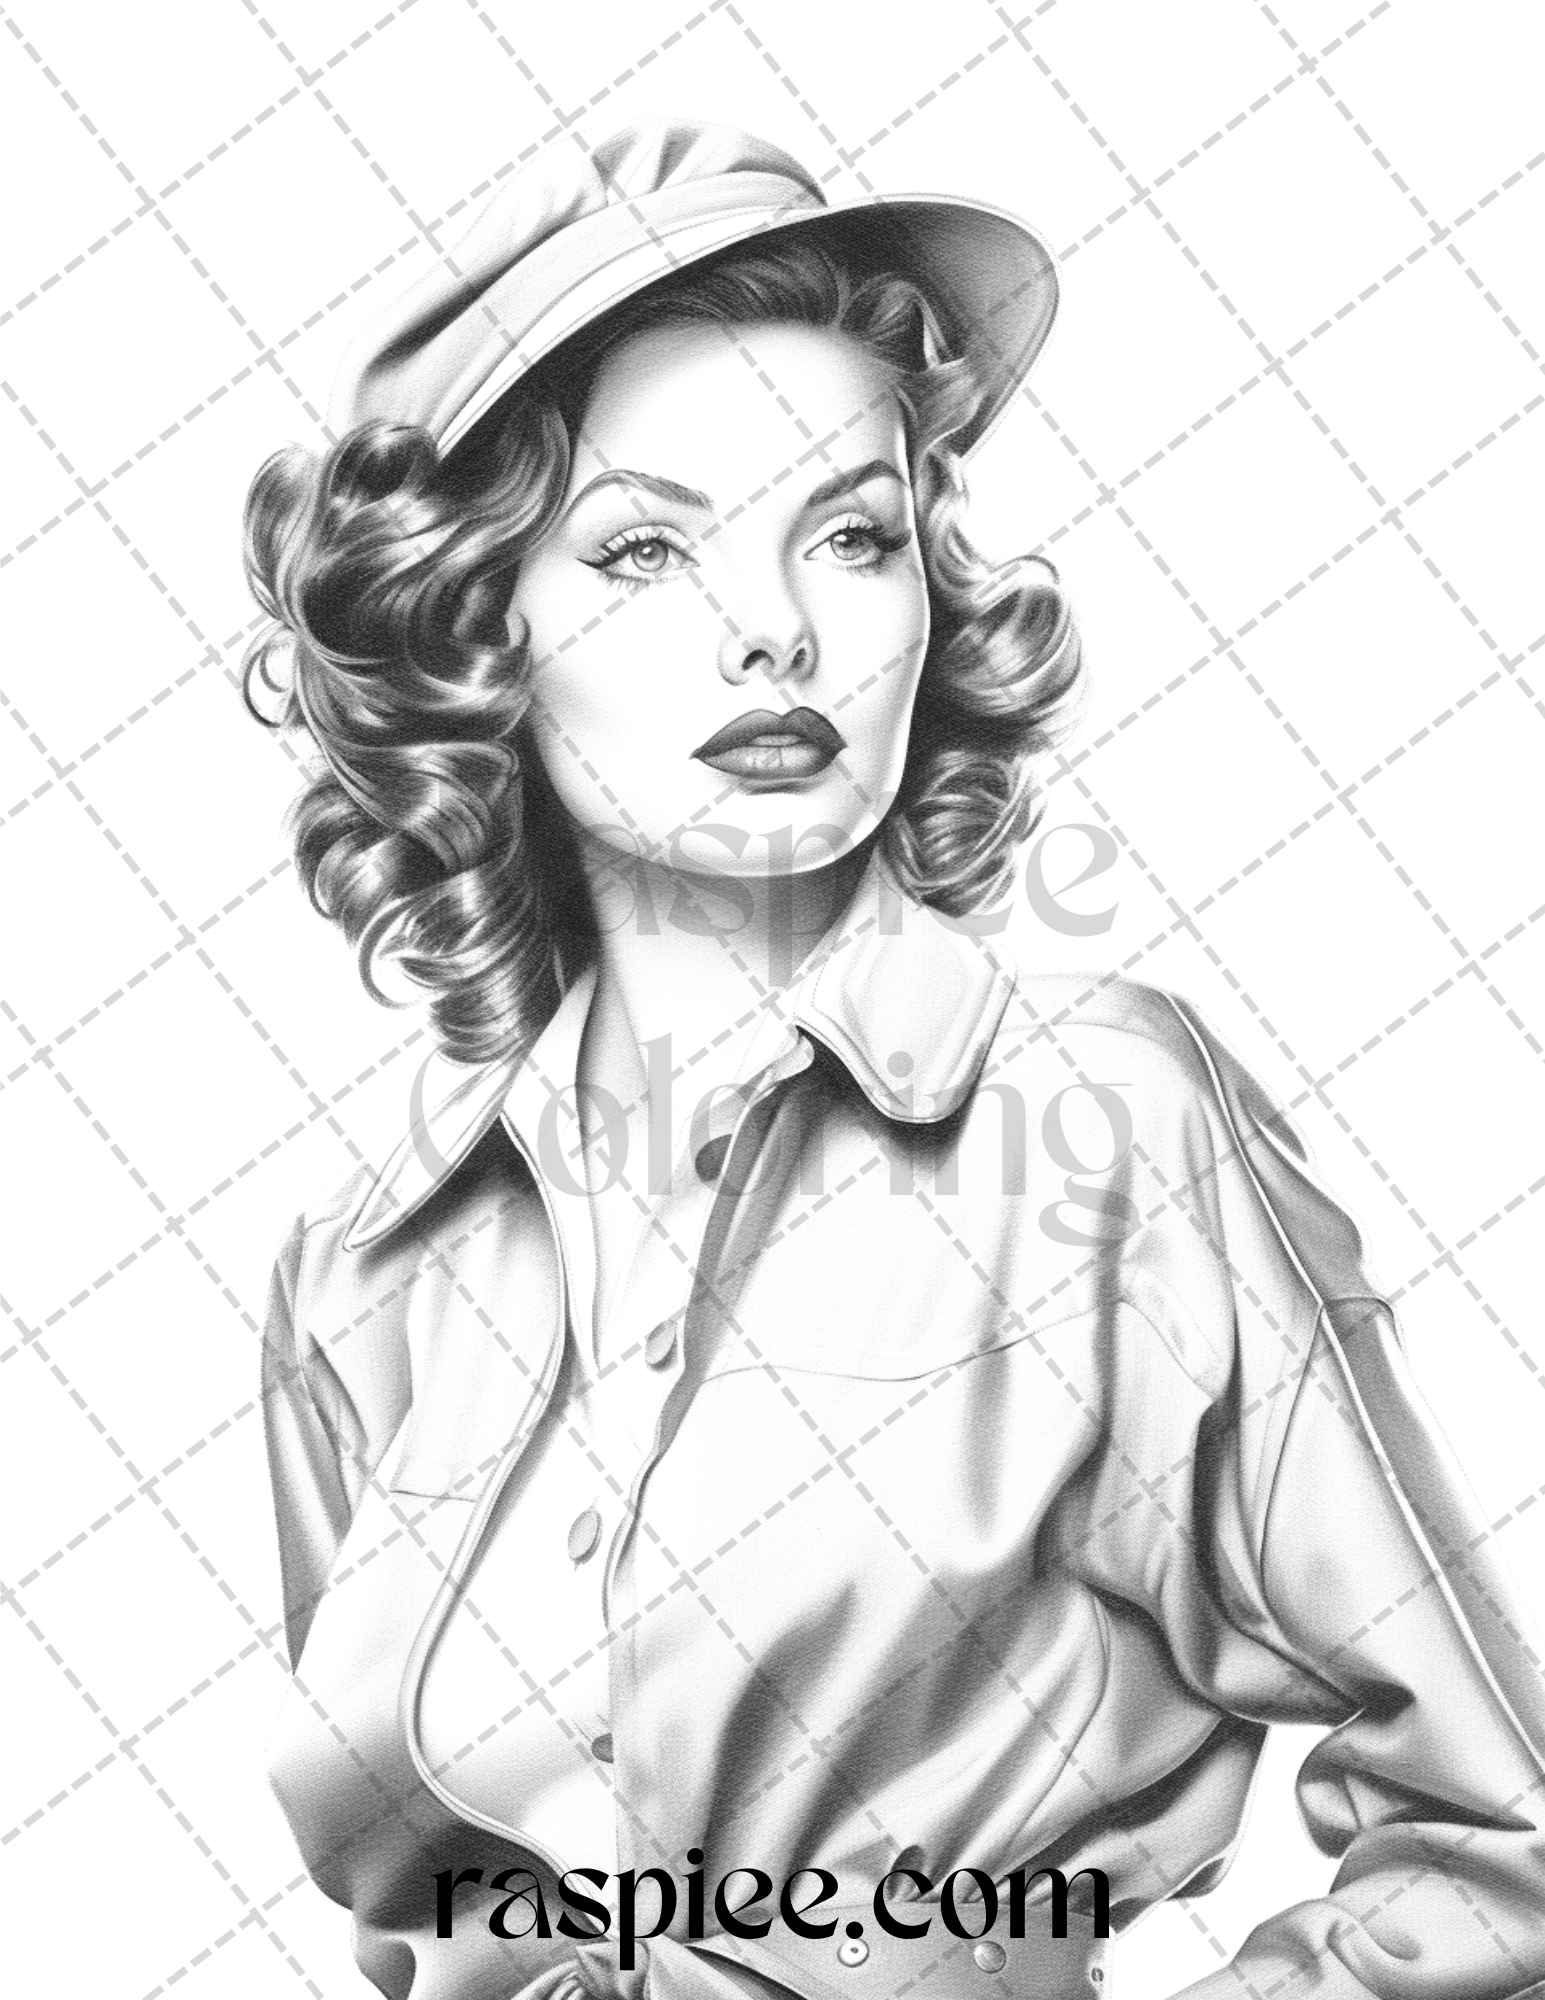 Vintage Fashion Grayscale Coloring Pages Printable for Adults, PDF File Instant Download - raspiee